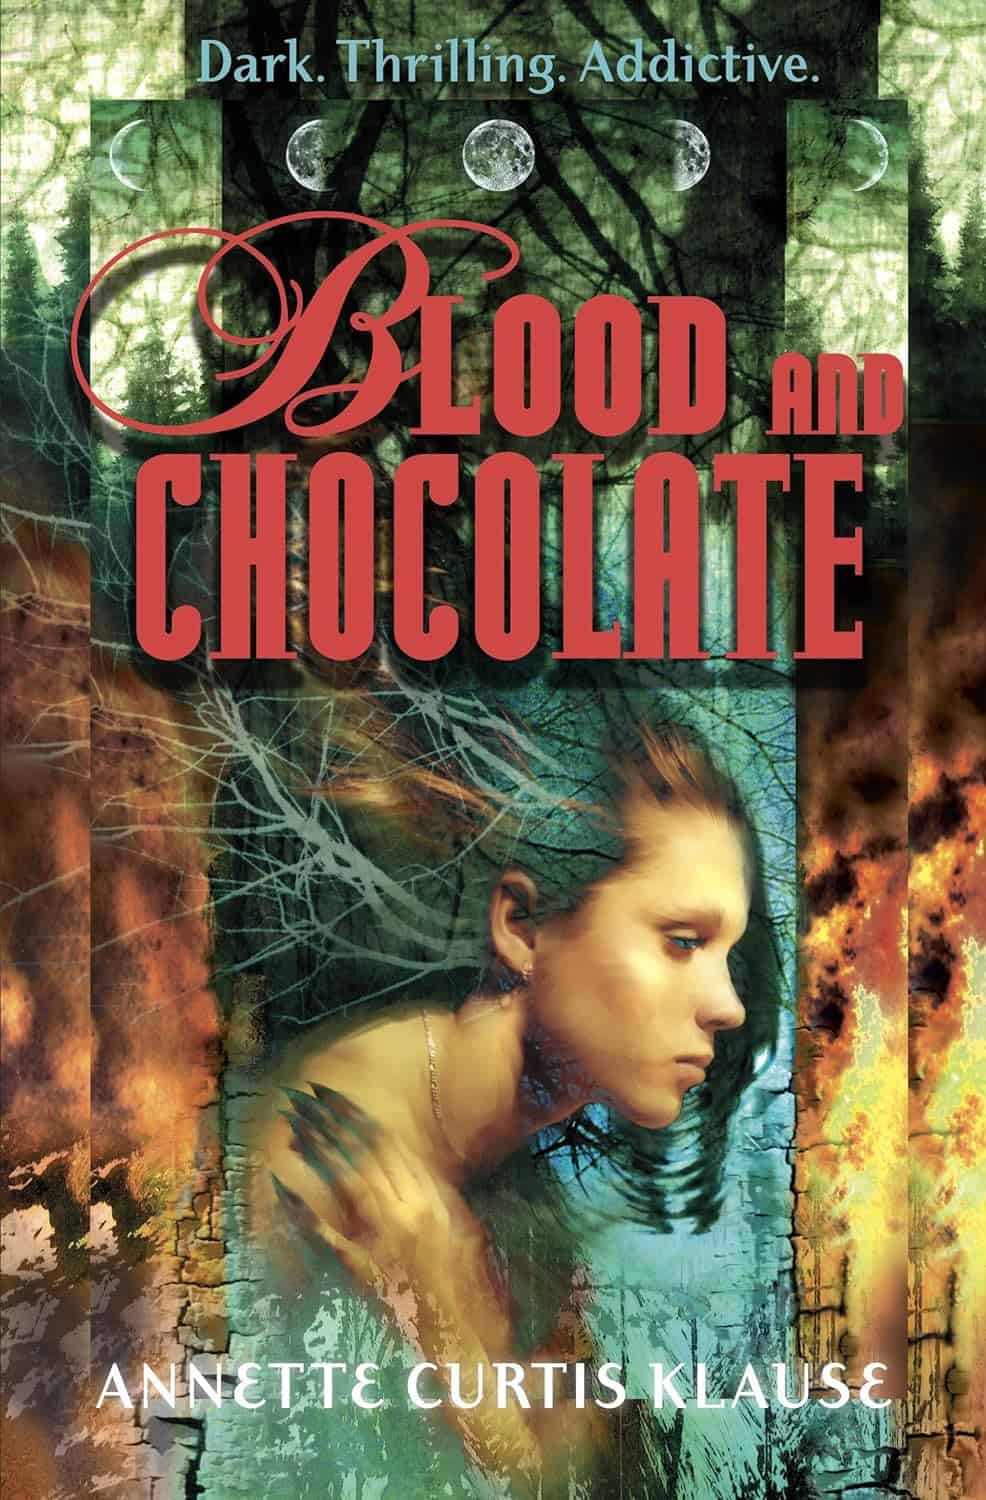 Ember Blood and Chocolate by Annette Curtis Klause